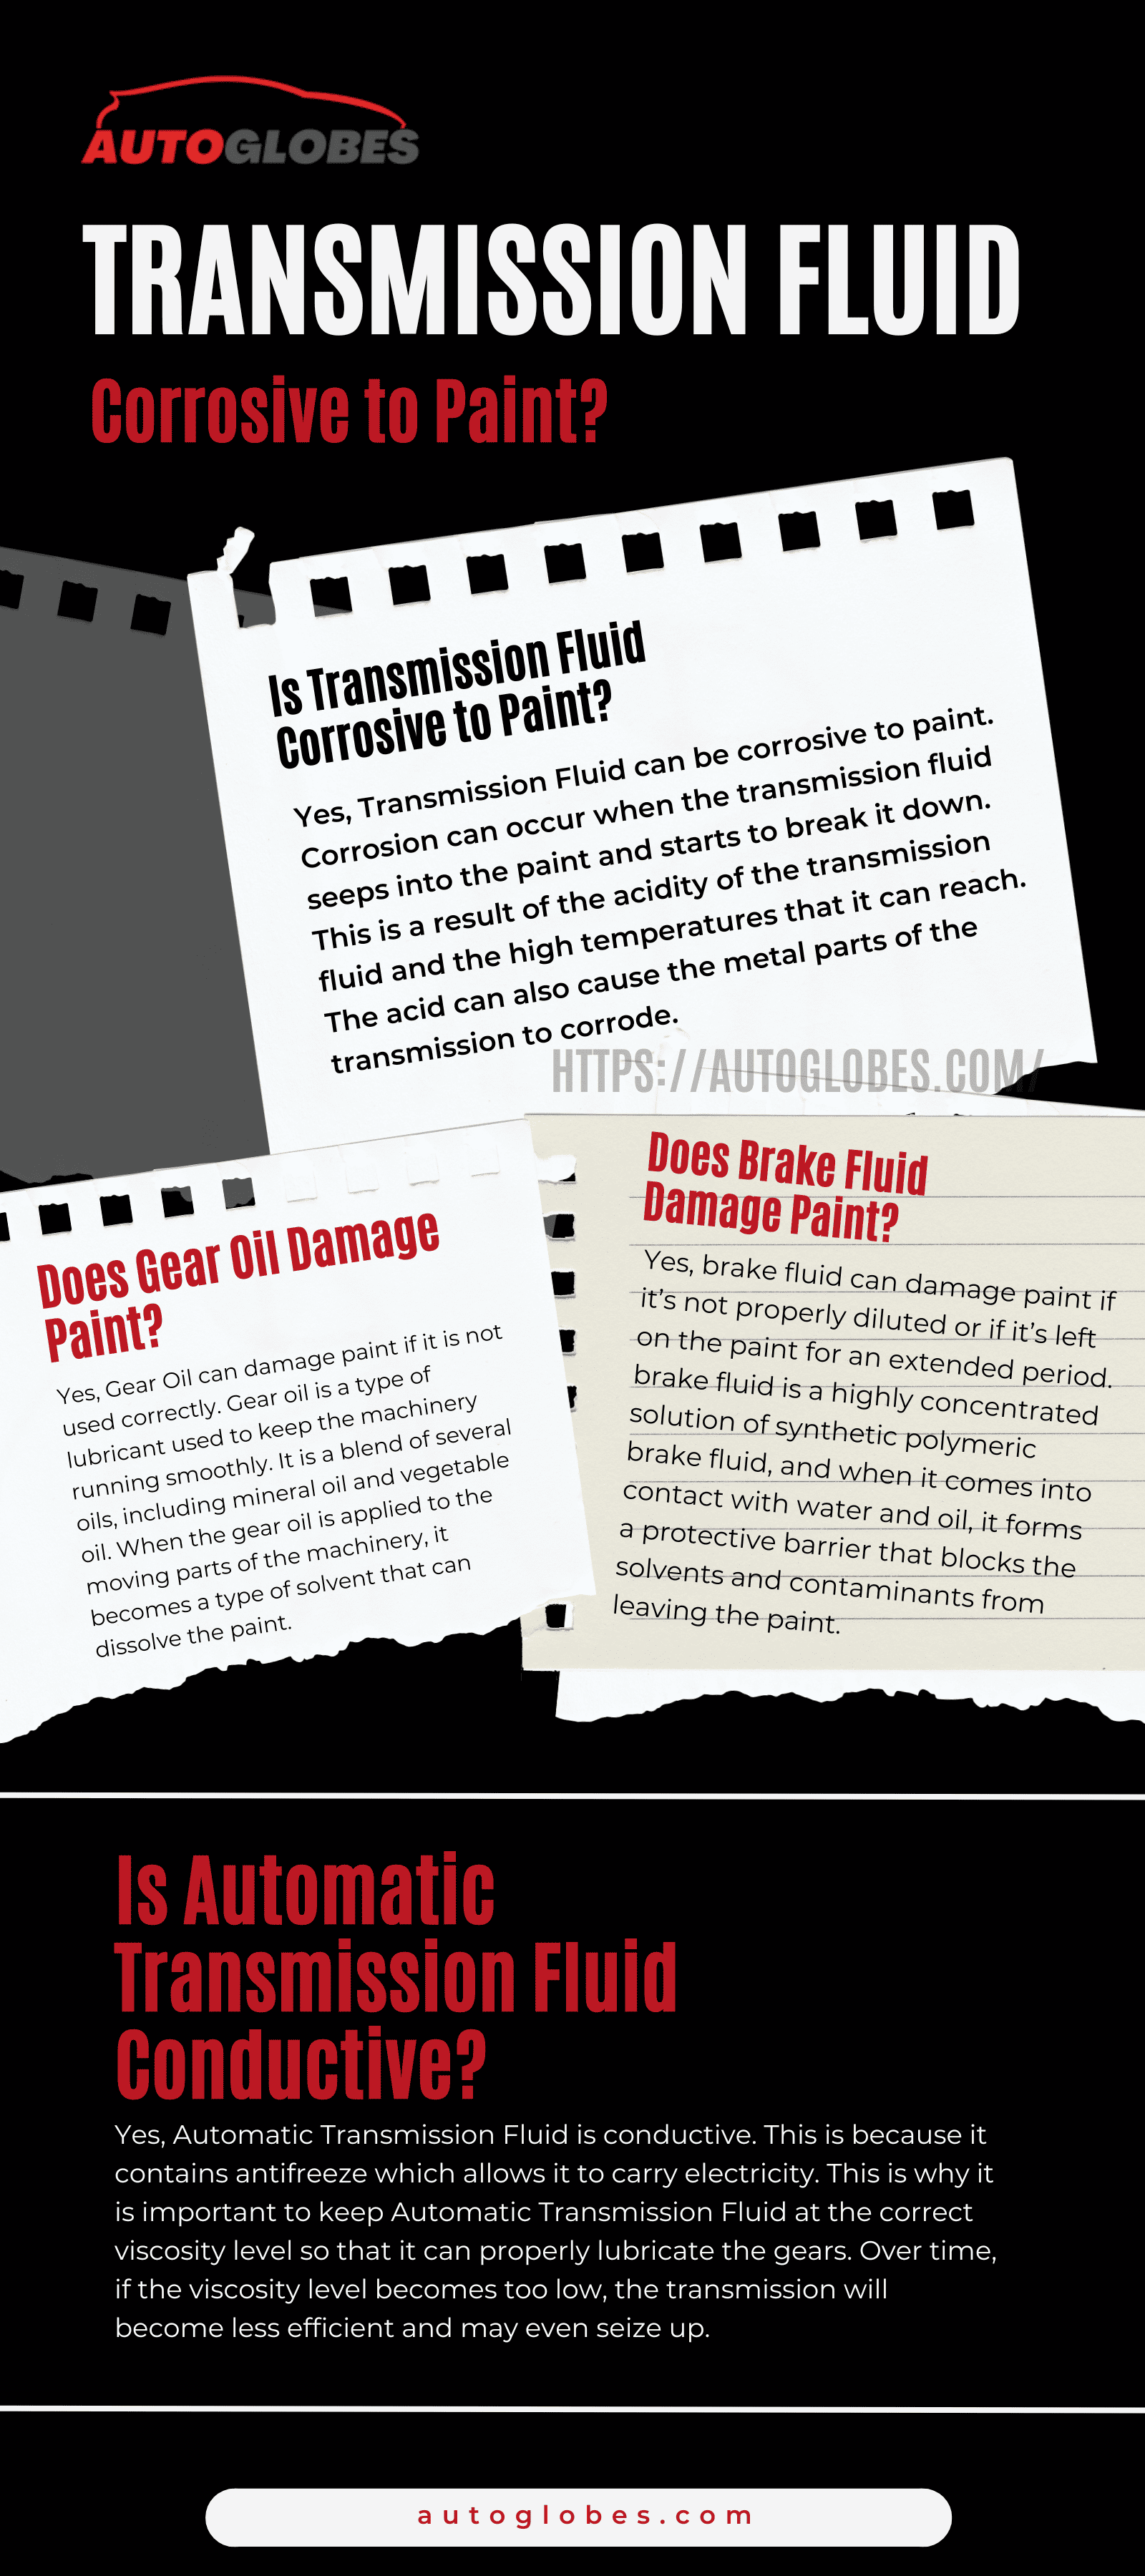 Is Transmission Fluid Corrosive to Paint infographic